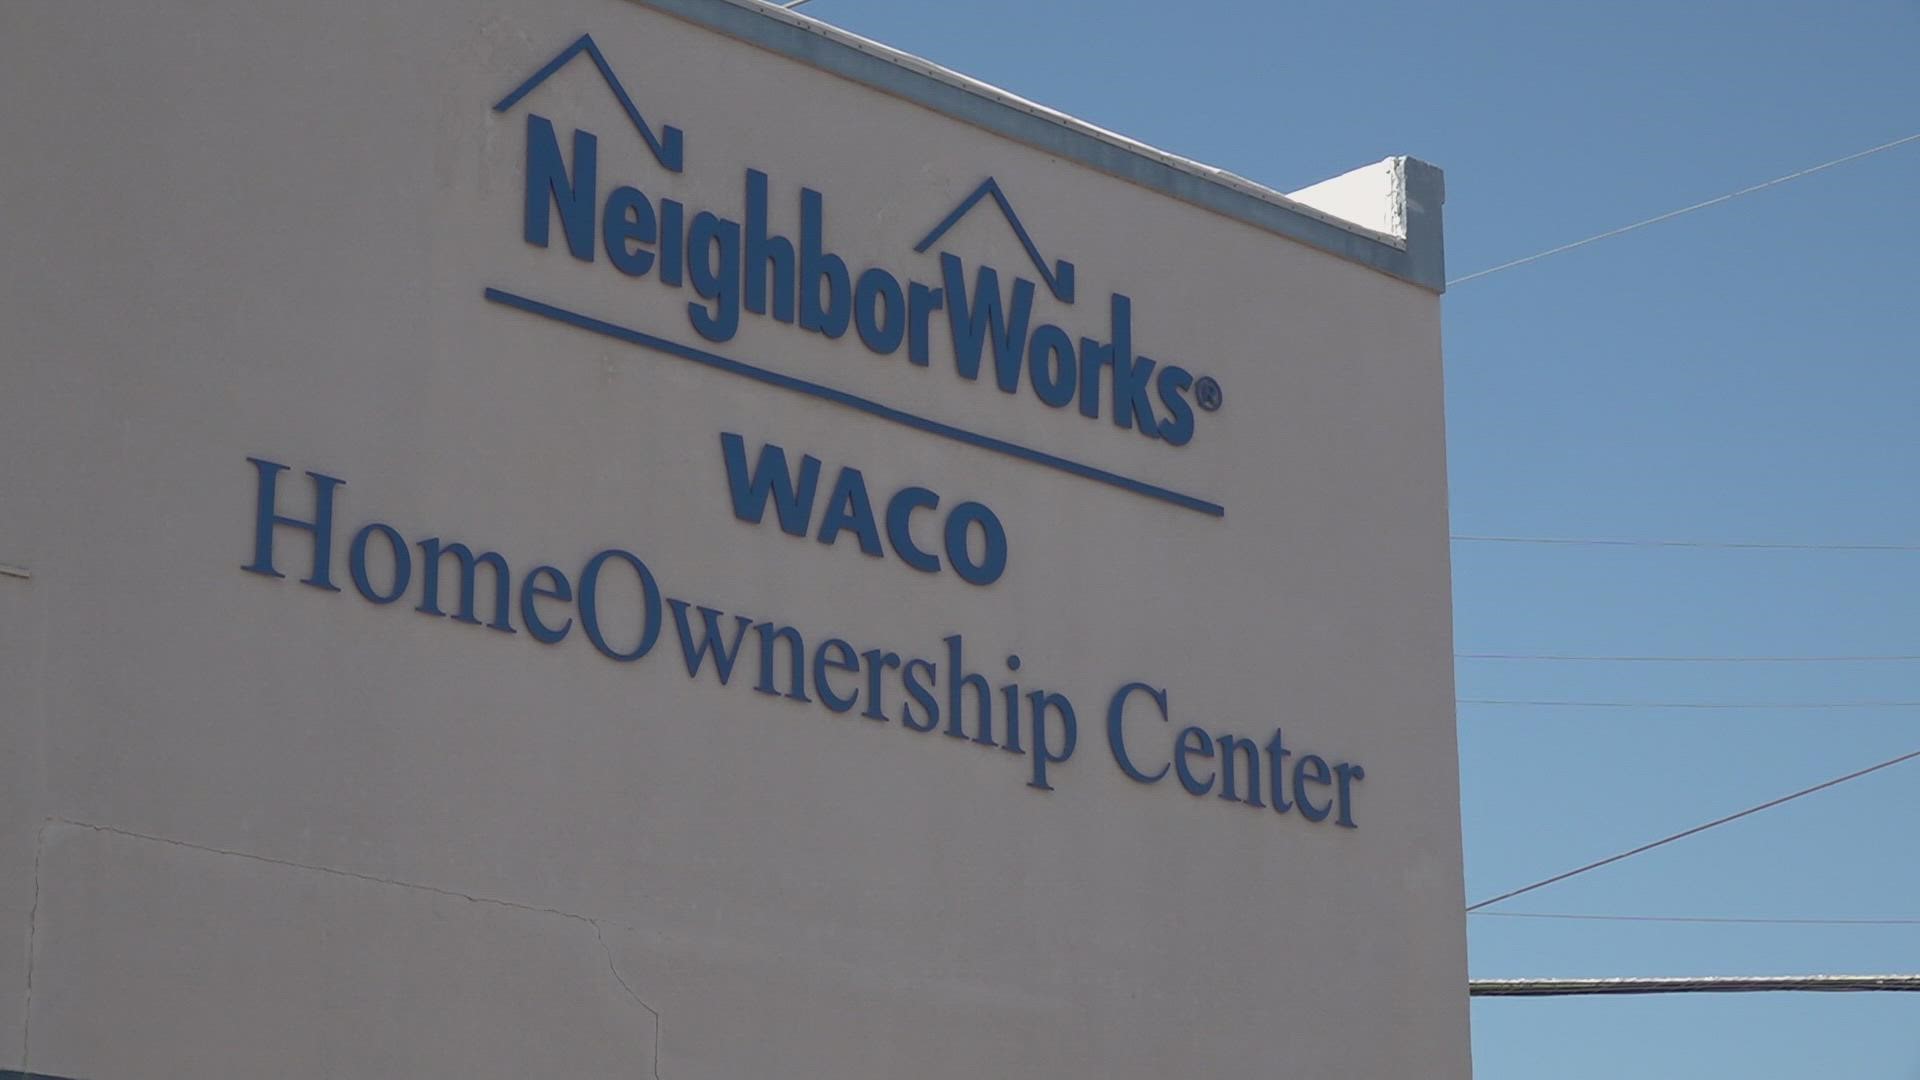 Neighborworks Waco will be offering home ownerships and financial literacy courses geared towards those who are more comfortable speaking the Spanish language.